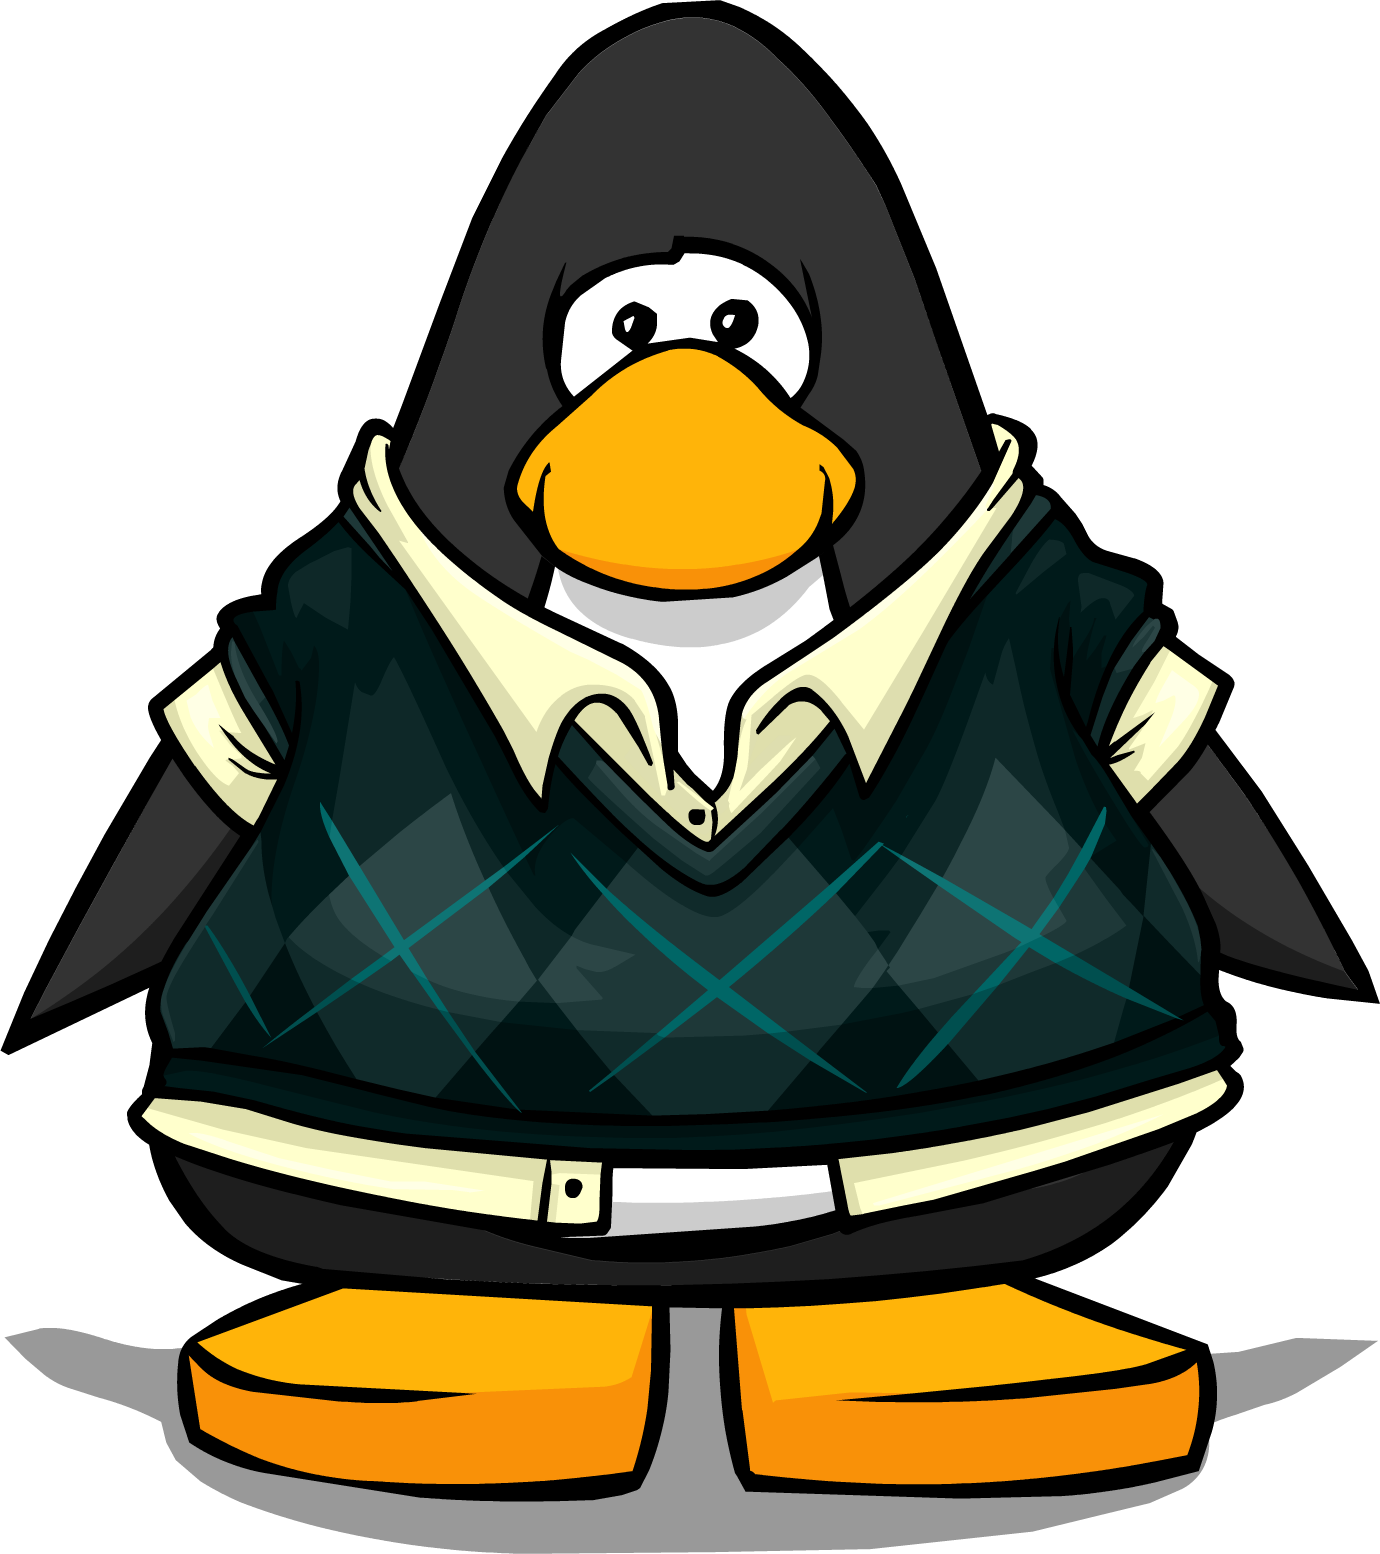 Boy's Sweater Vest Outfit From A Player Card - Club Penguin Skeleton (1380x1554)